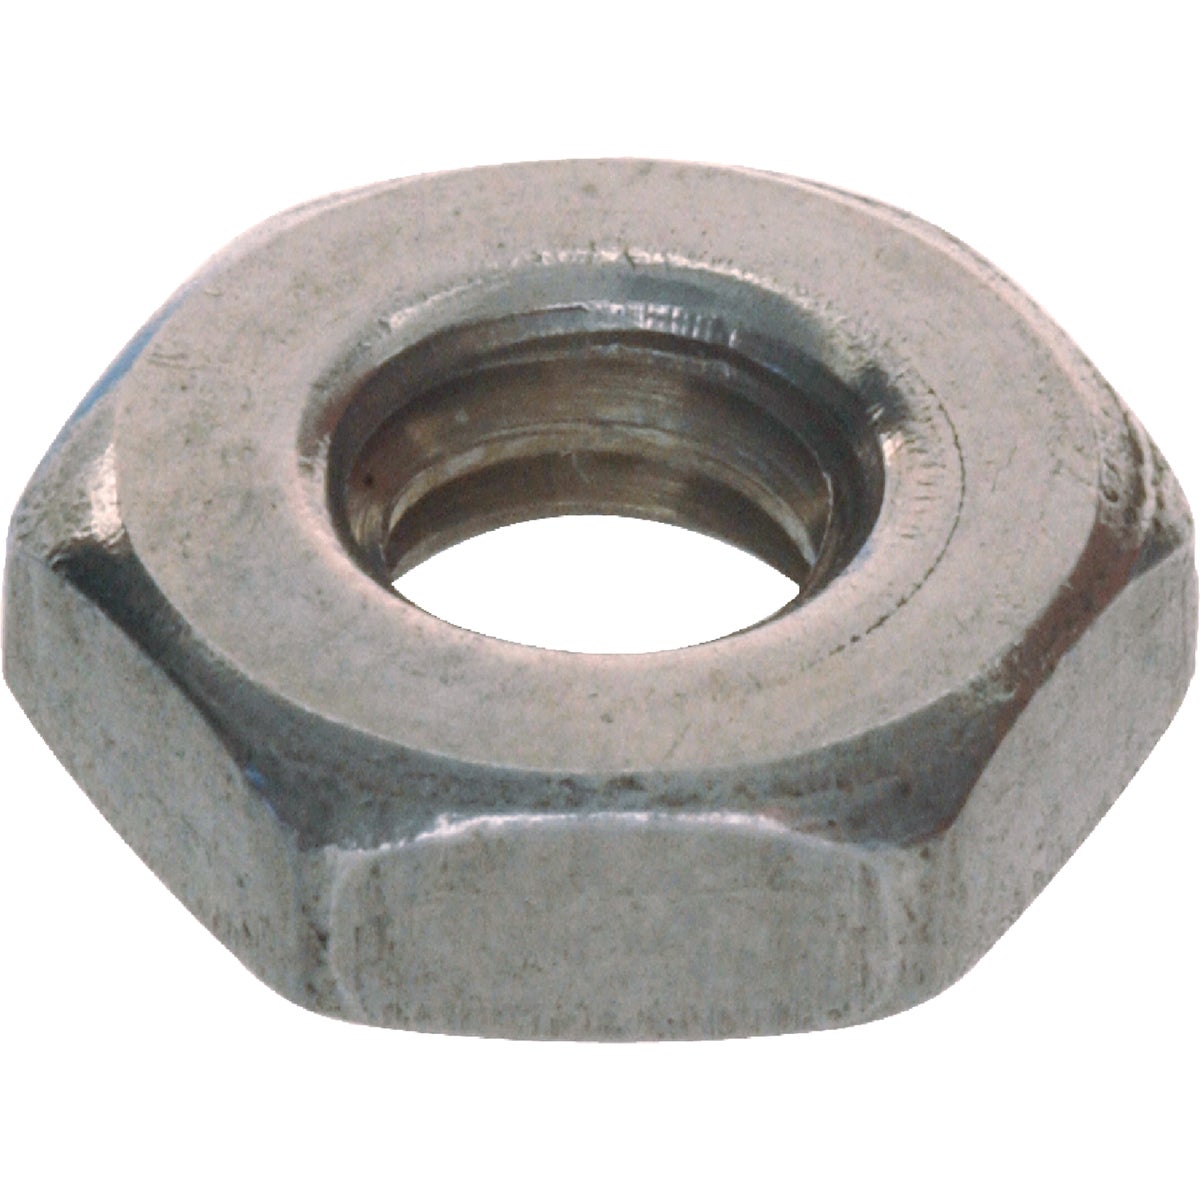 Item 726206, Stainless Steel Machine Screw Nuts are hex nuts specifically designed to 